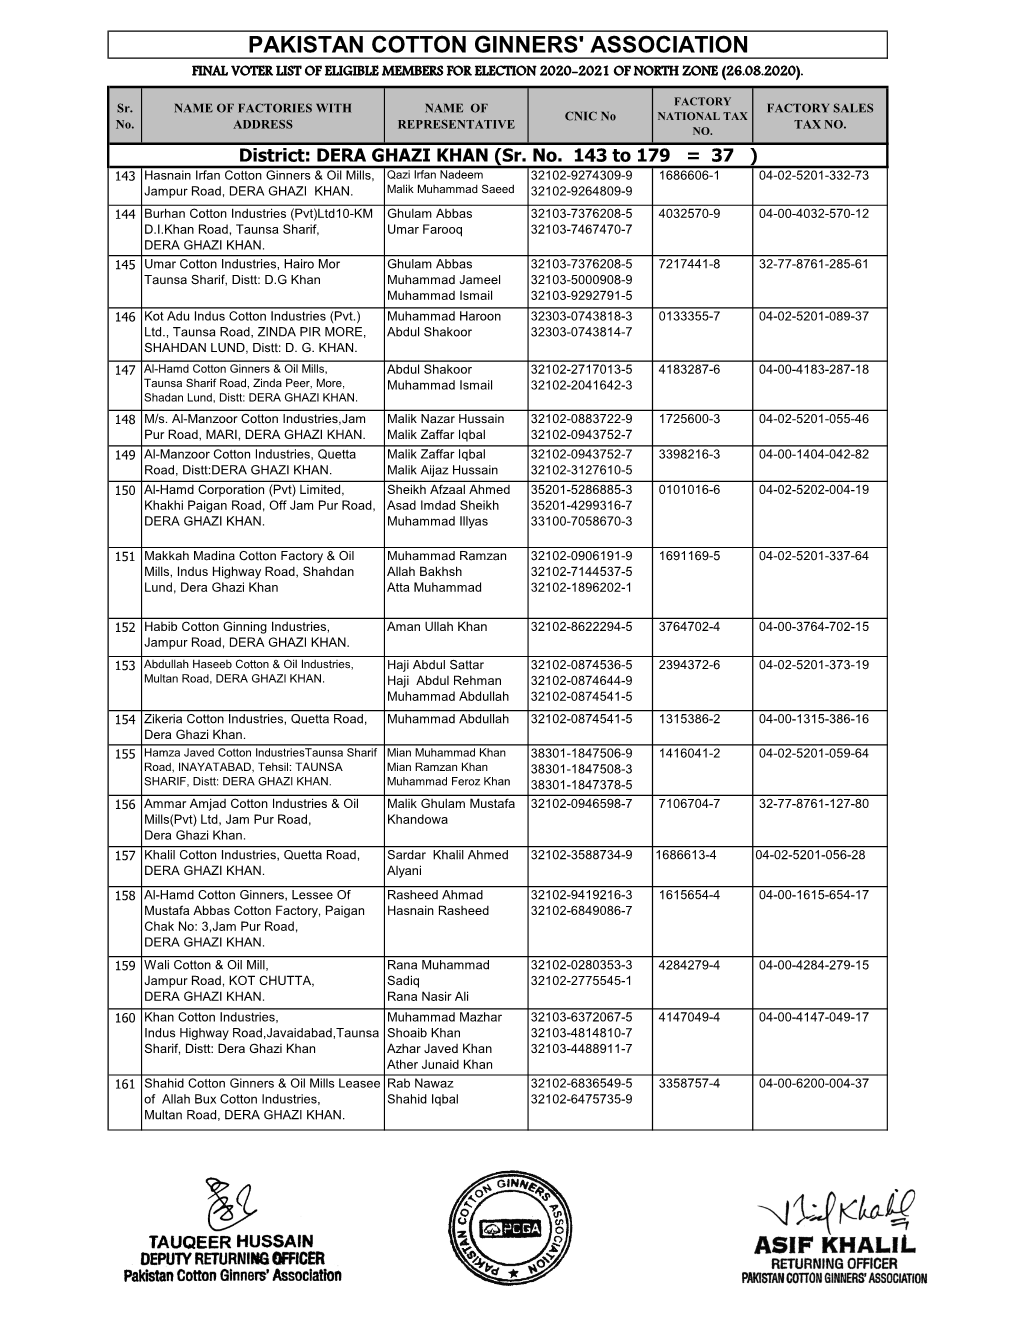 Pakistan Cotton Ginners' Association Final Voter List of Eligible Members for Election 2020-2021 of North Zone (26.08.2020)